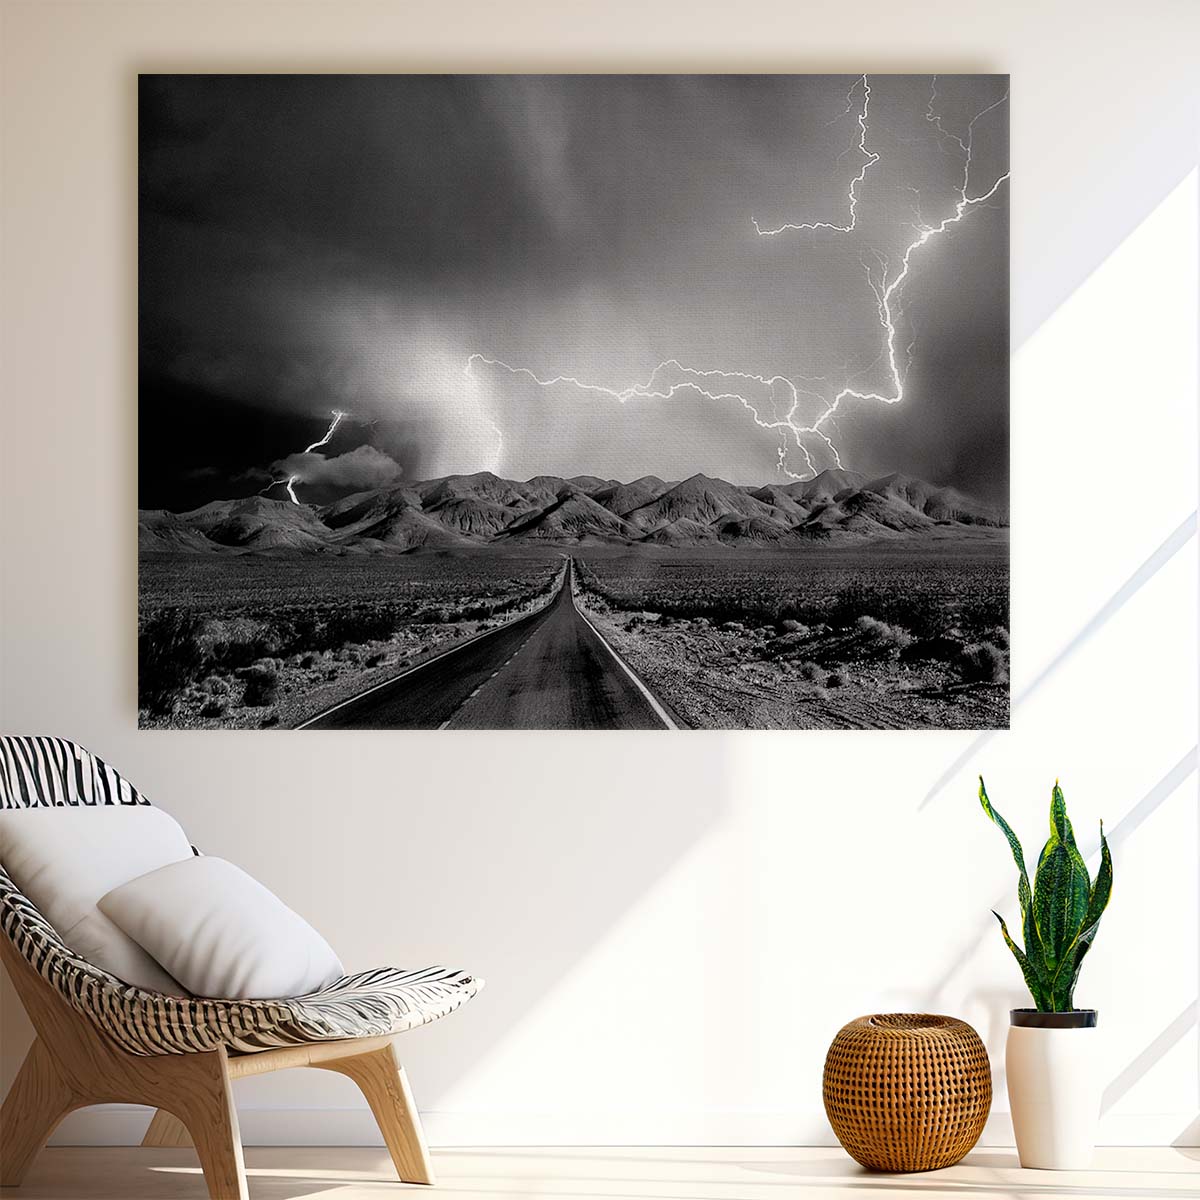 Dramatic Nevada Storm & Desert Landscape Wall Art by Luxuriance Designs. Made in USA.